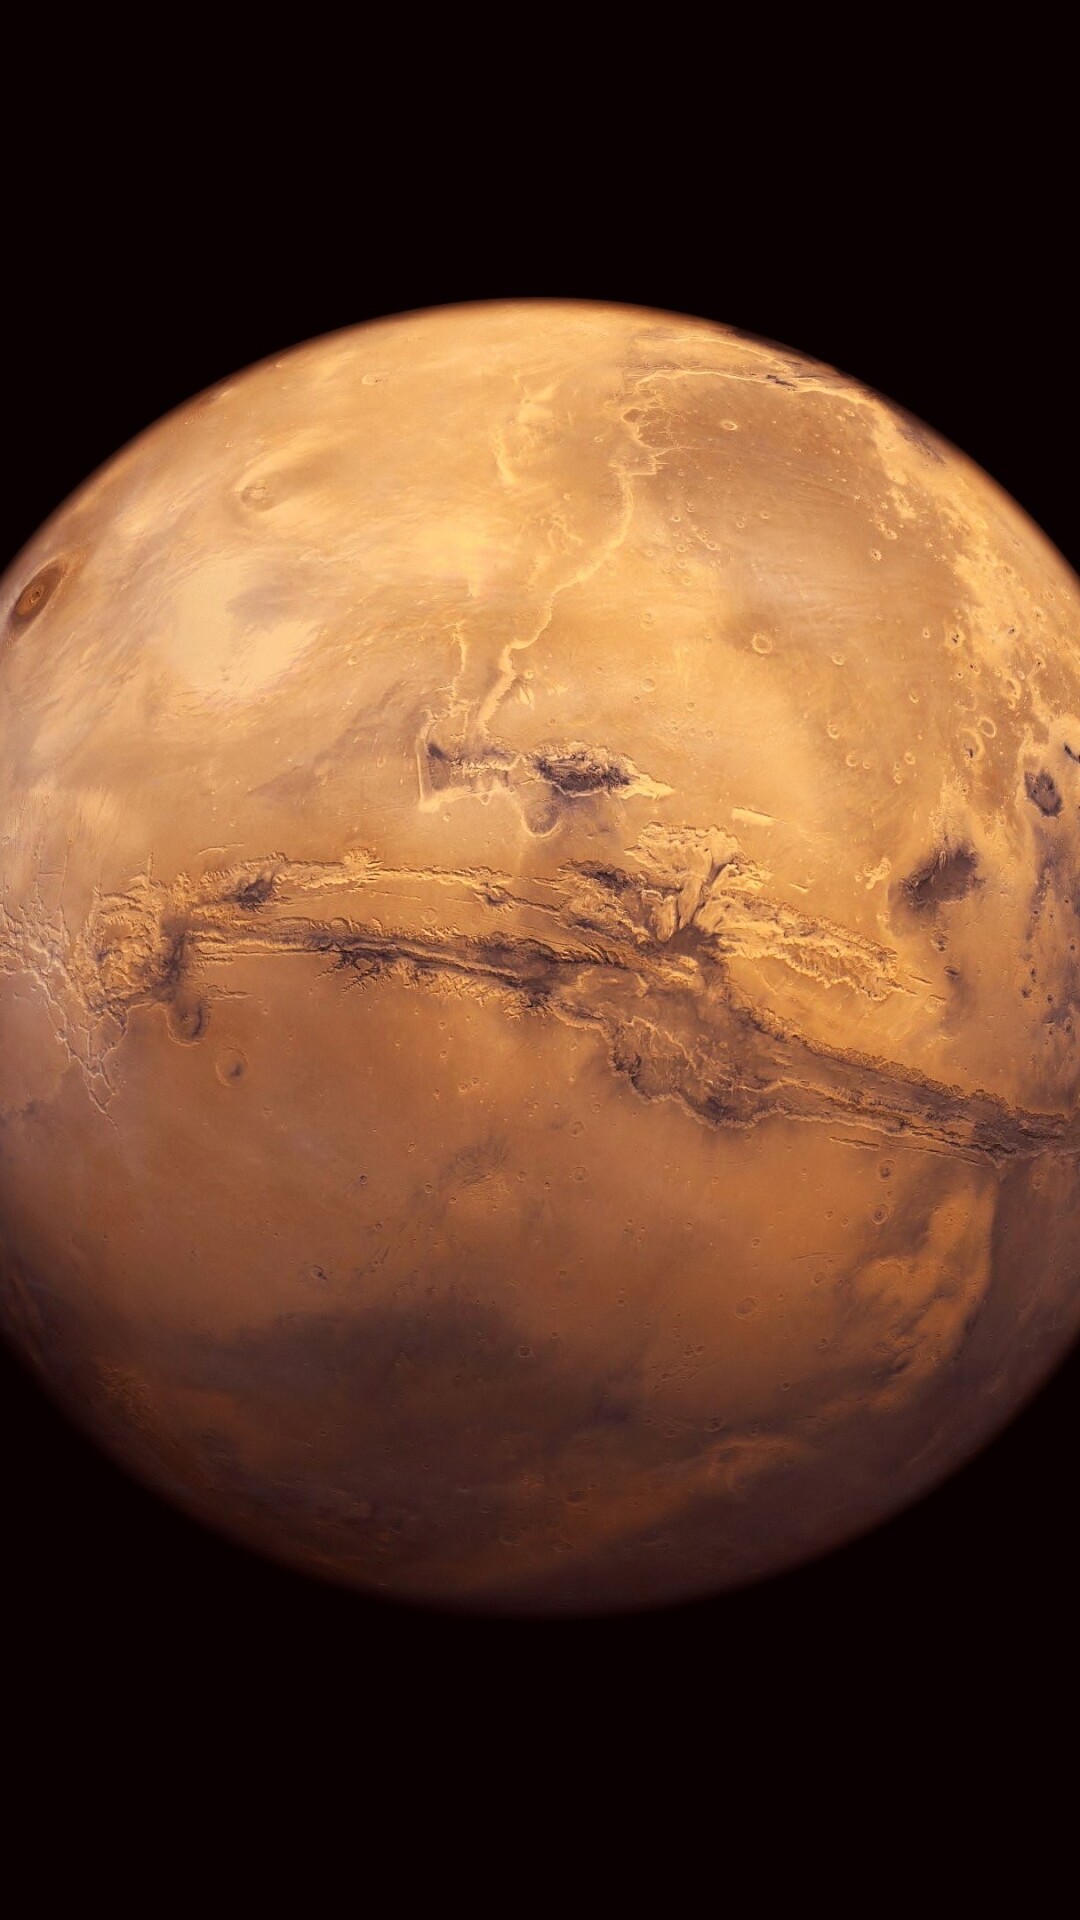 Mars: The only planet whose solid surface and atmospheric phenomena can be seen in telescopes from Earth. 1080x1920 Full HD Background.